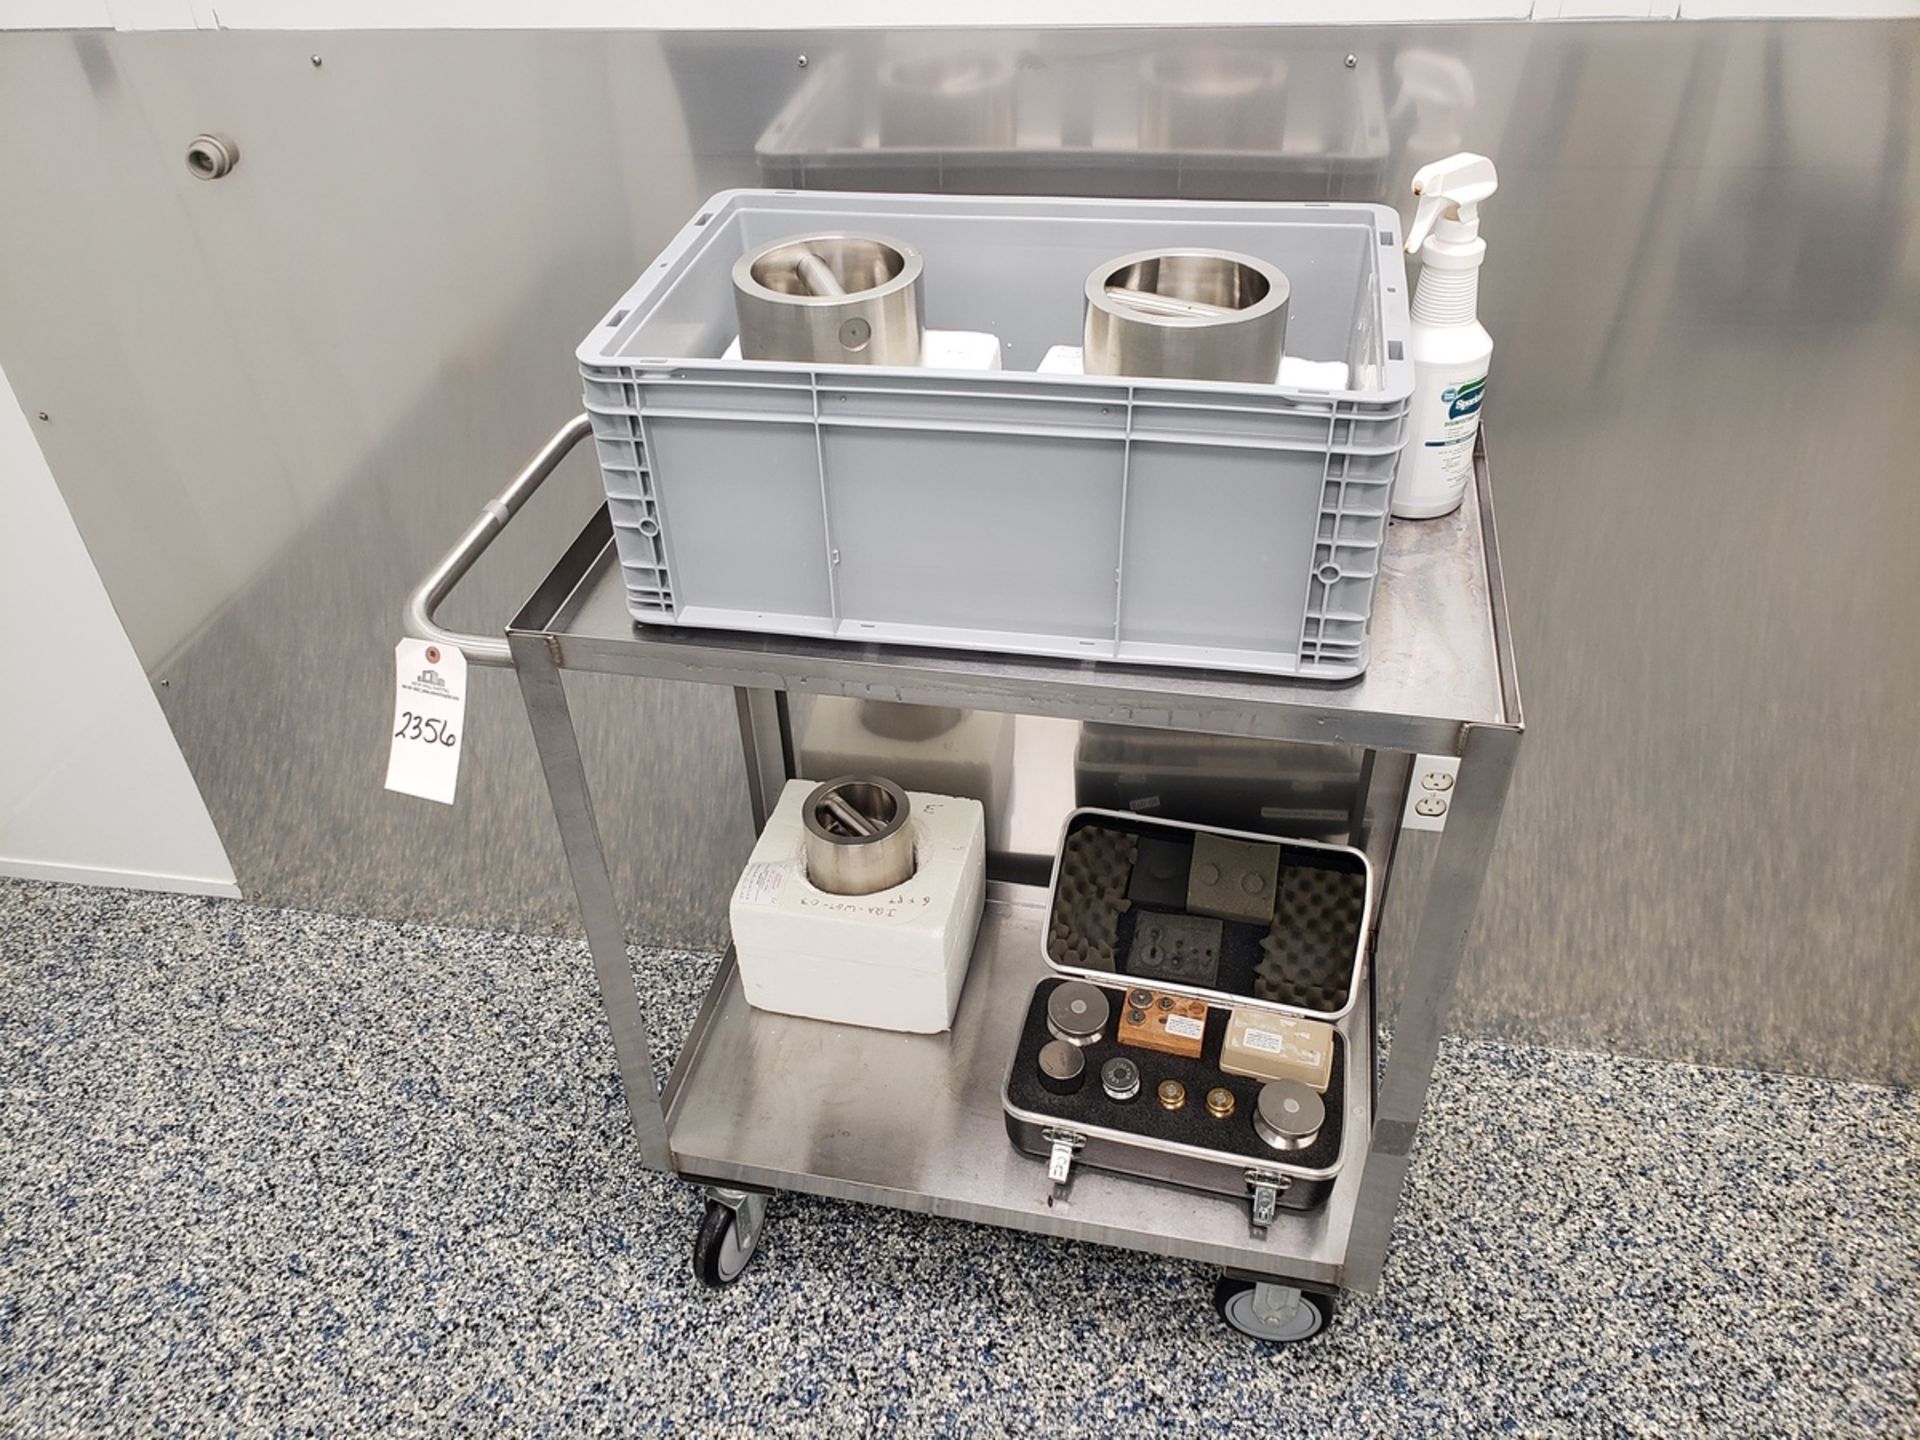 Laboratory Balance Weights W/Stainless Steel Cart | Rig Fee $50